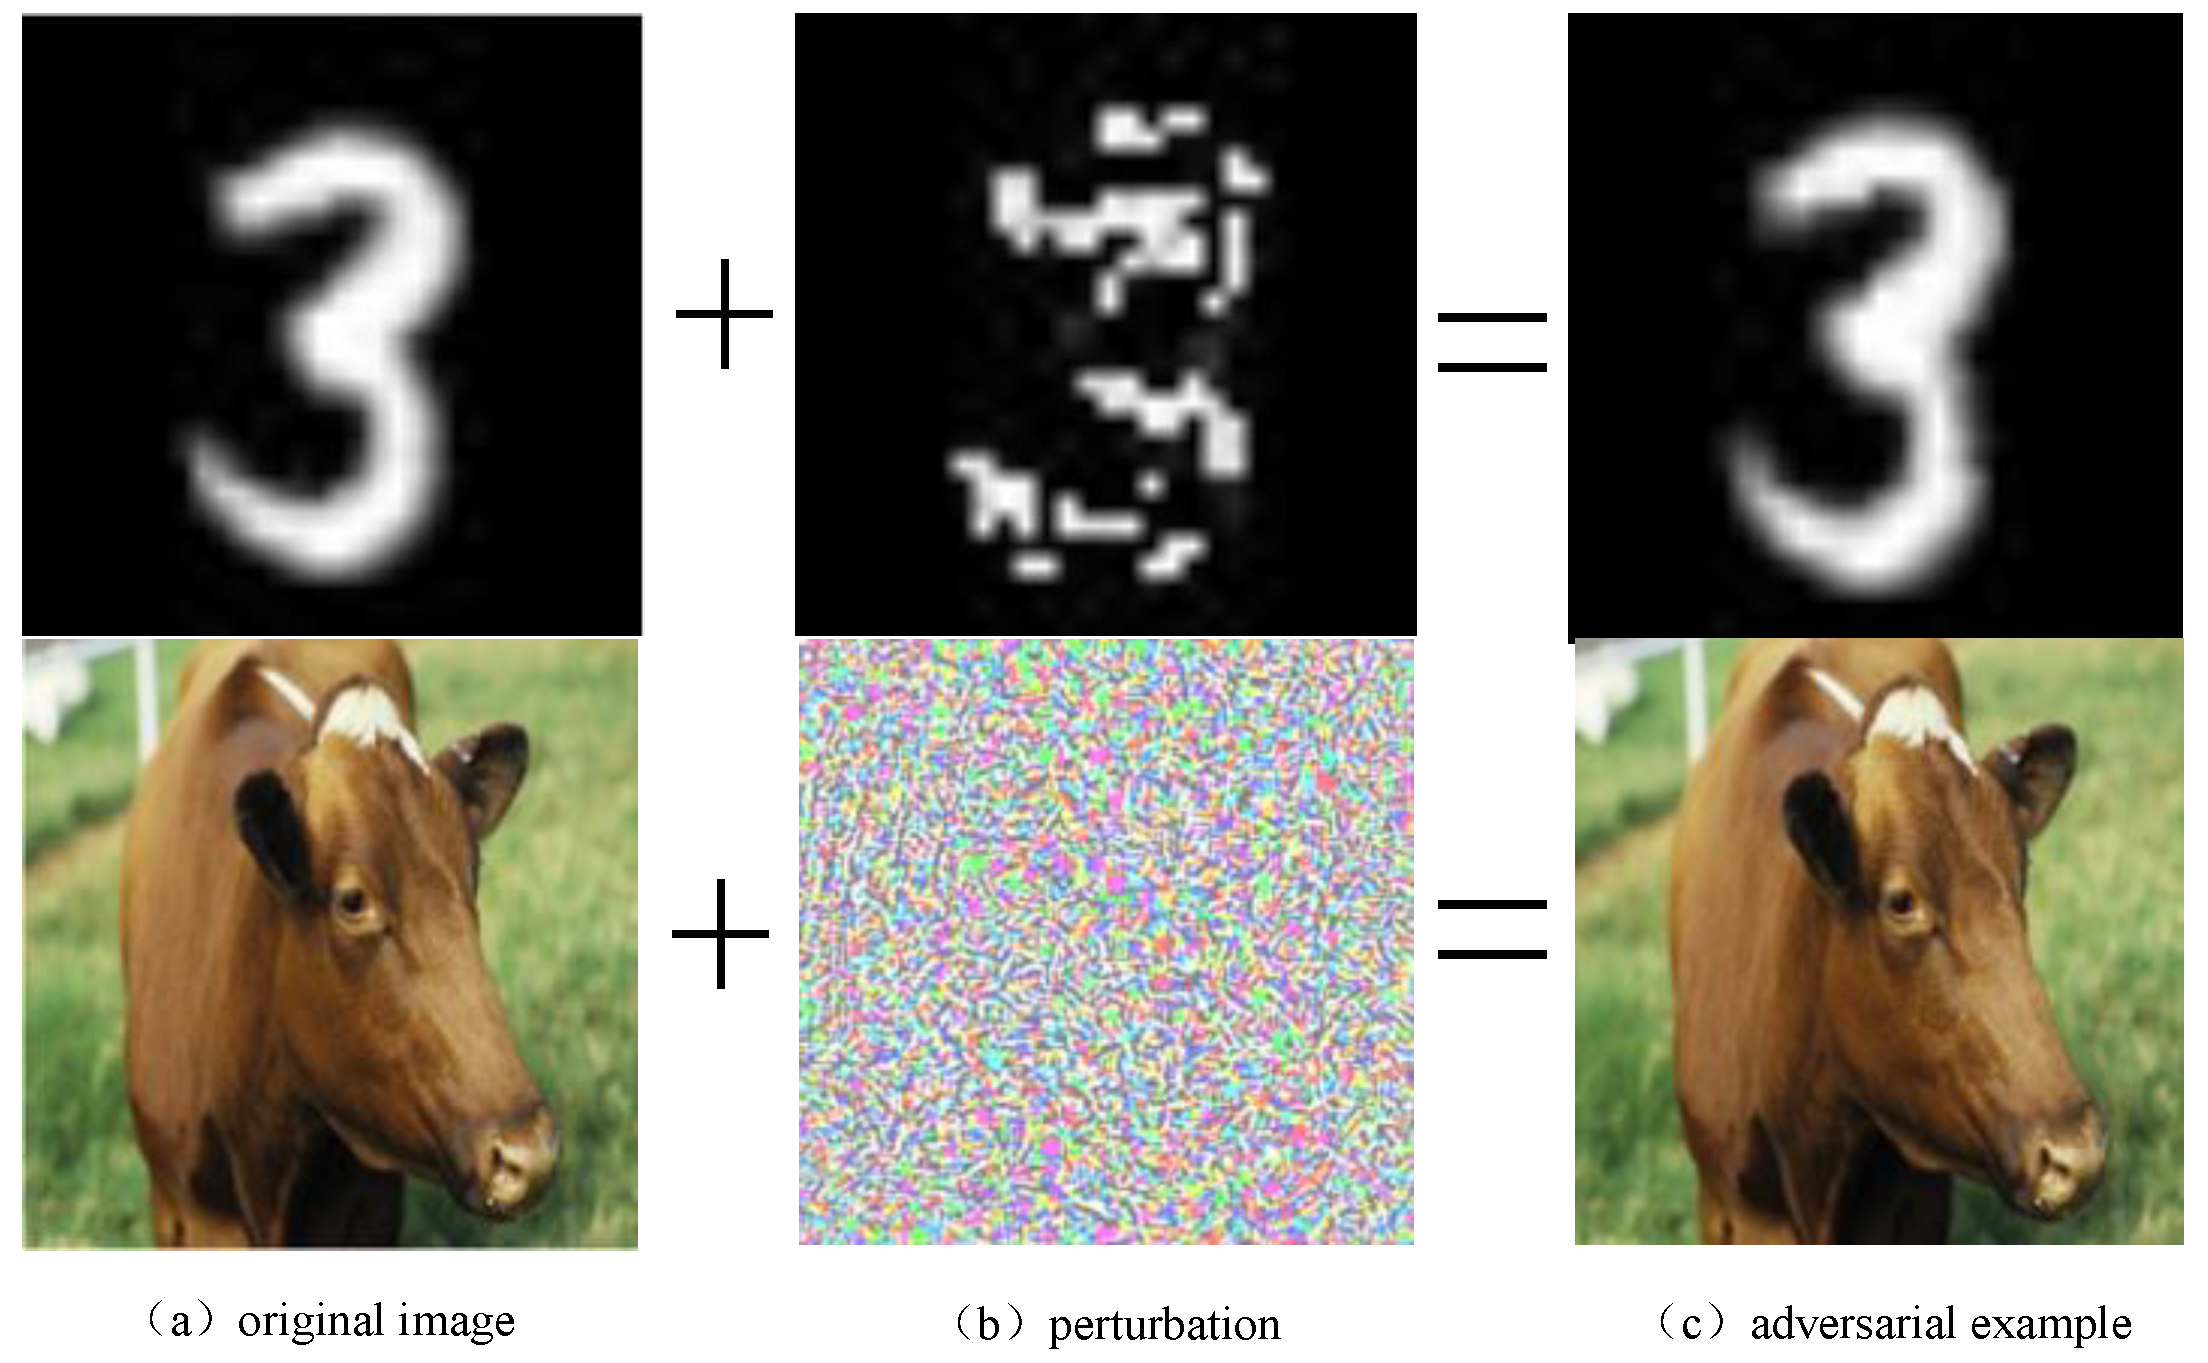 A Complete List of All Adversarial Example Papers